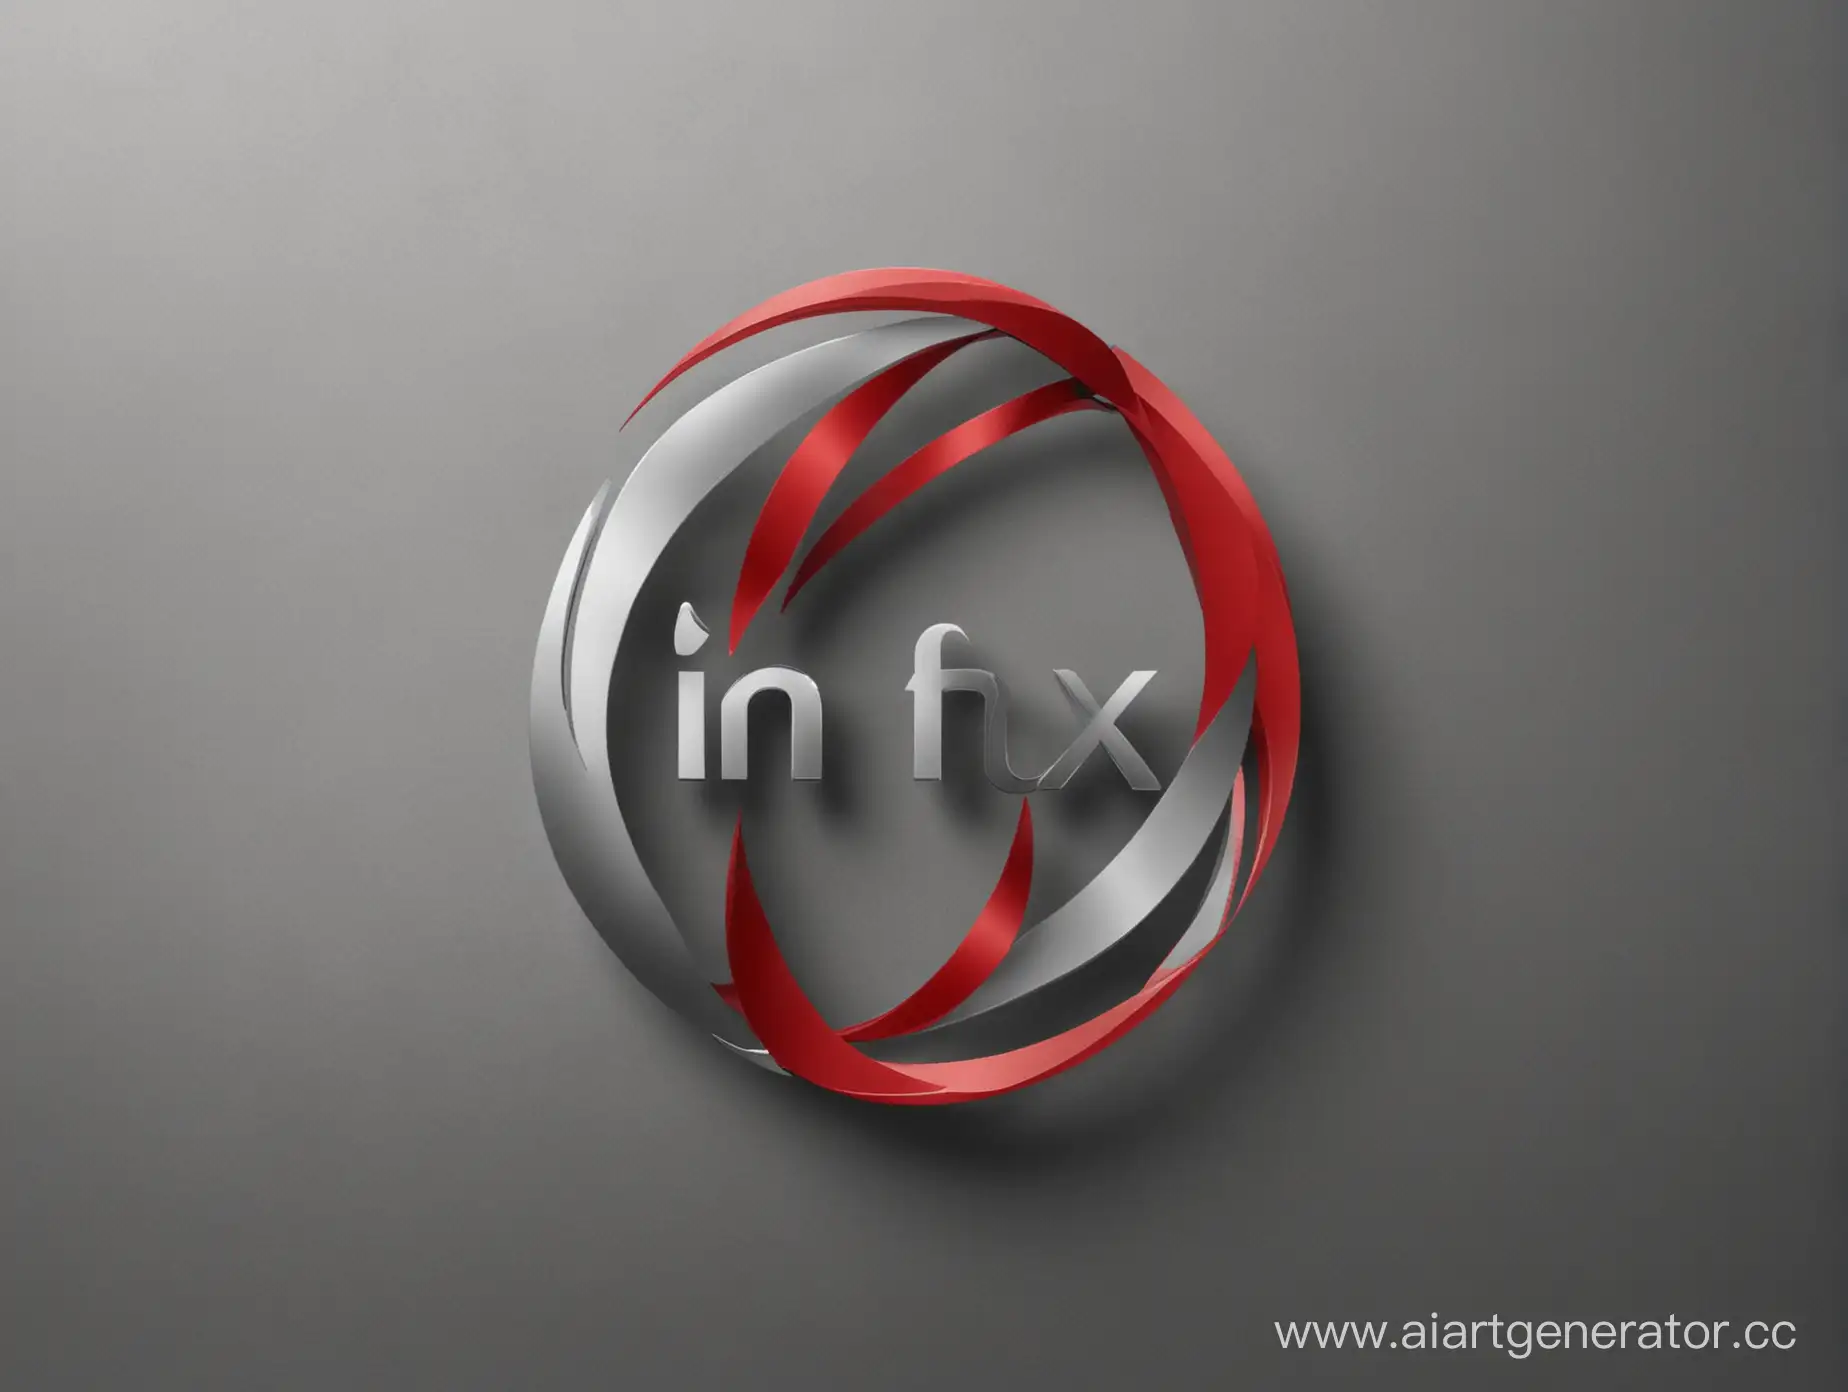 Infinix-Logo-in-Bold-Red-and-Subtle-Gray